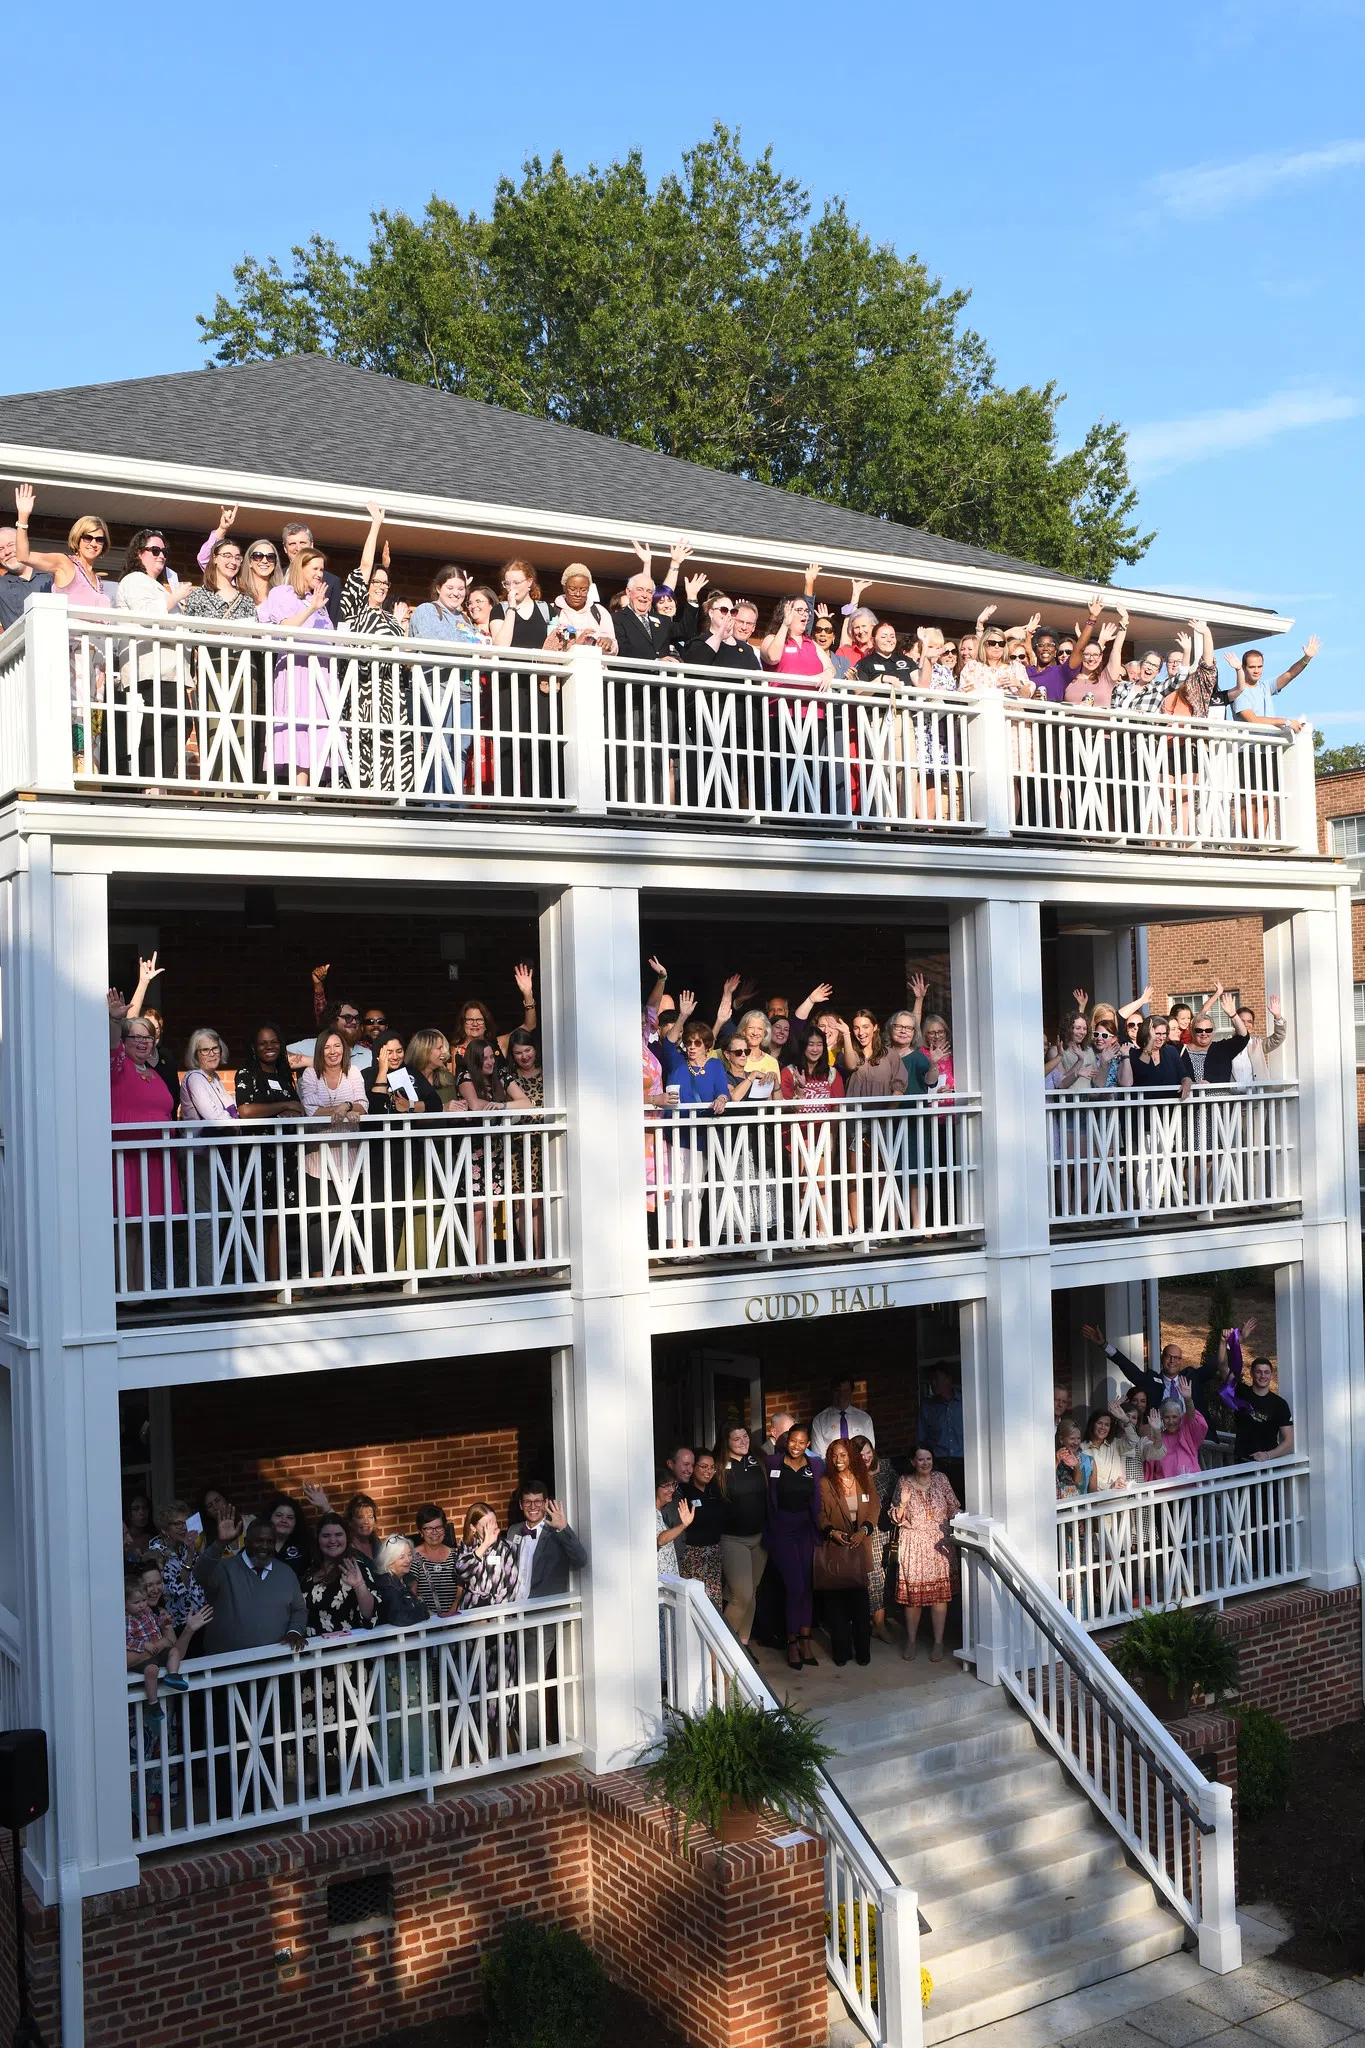 Photo shows groups of people waving from each of three porches on a brick three story building.